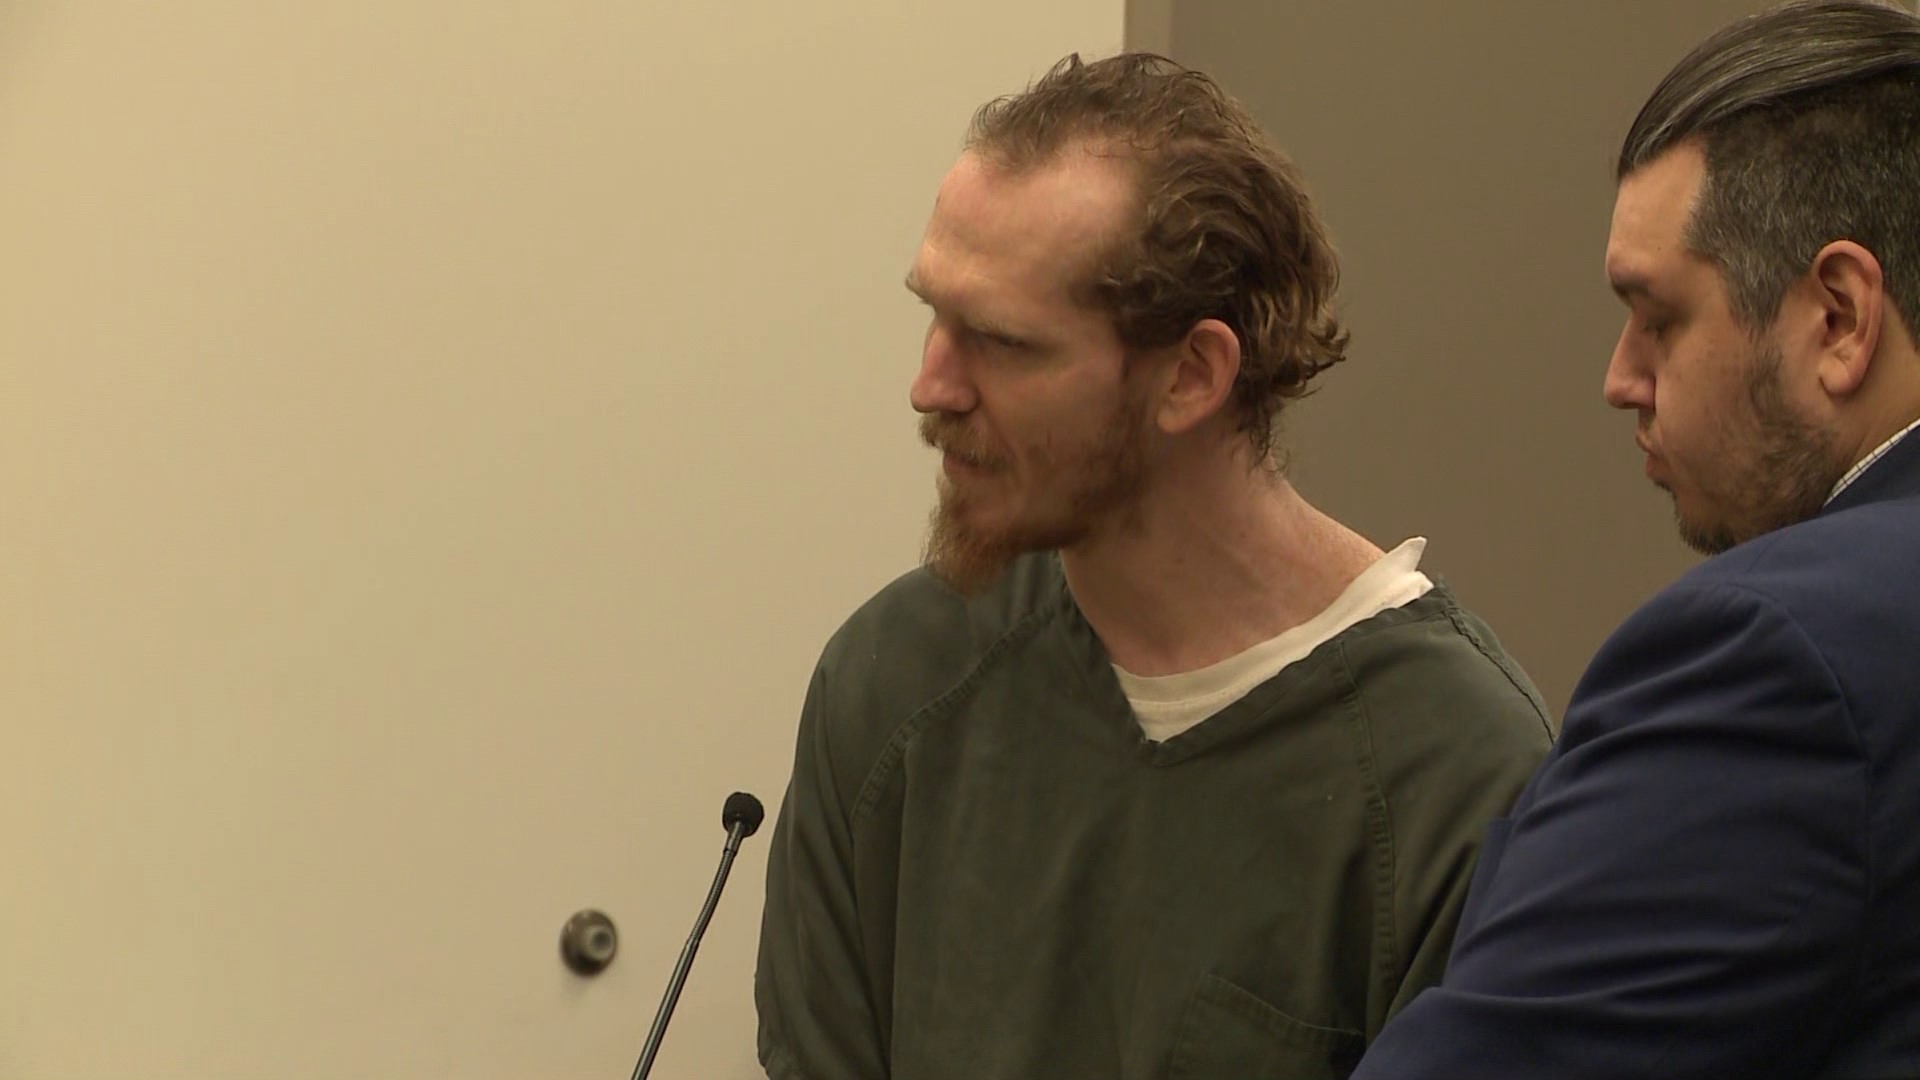 Jacob Ryan was found guilty in March of murdering 25-year-old Cierra Paul and injuring her two young children in September 2021.